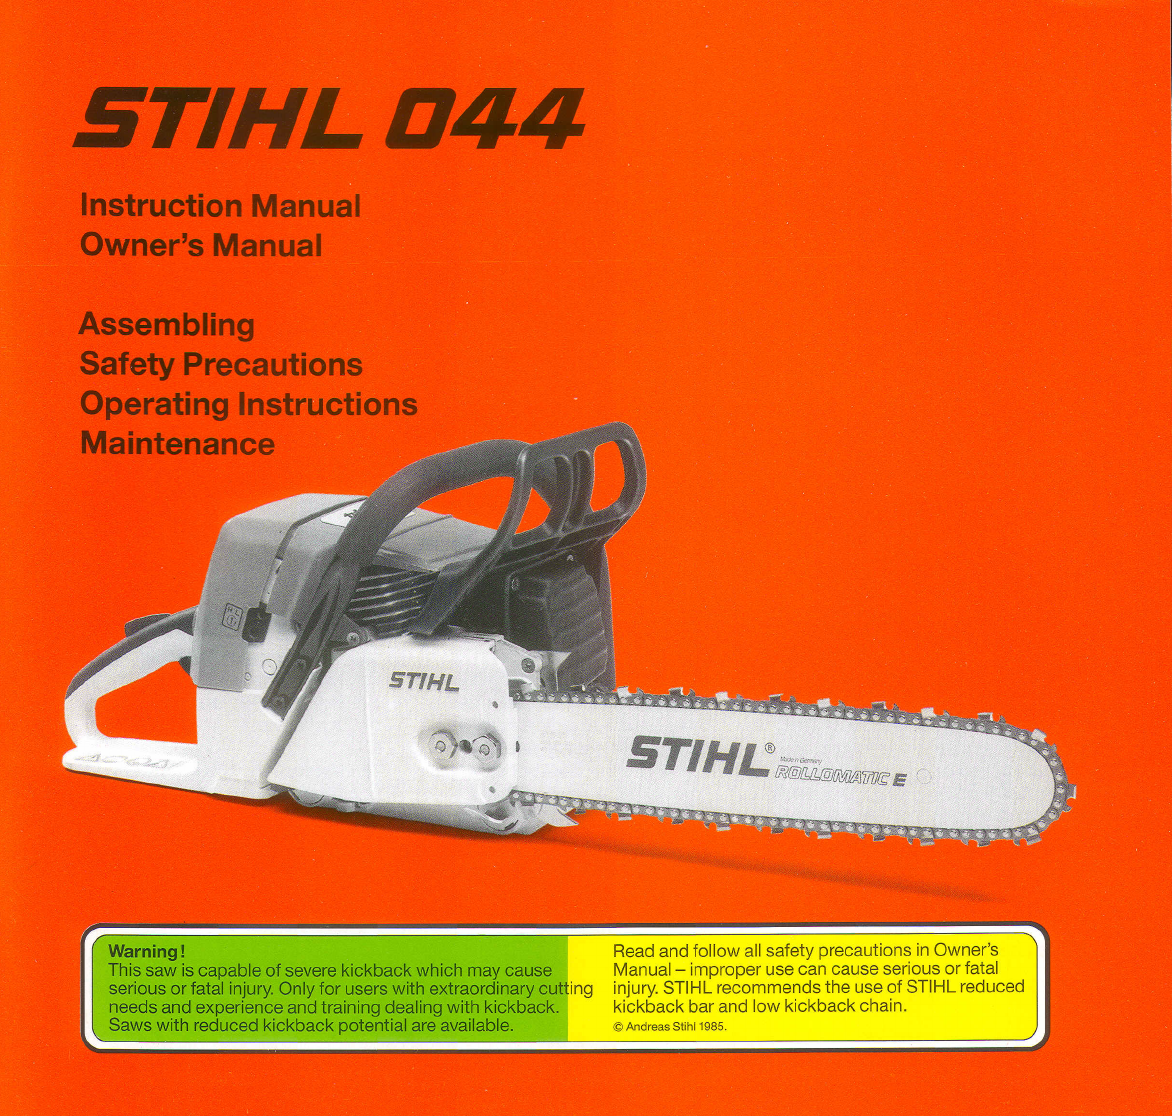 044 Stihl Chainsaw Service Workshop Repair & illustrated Parts List Manual 